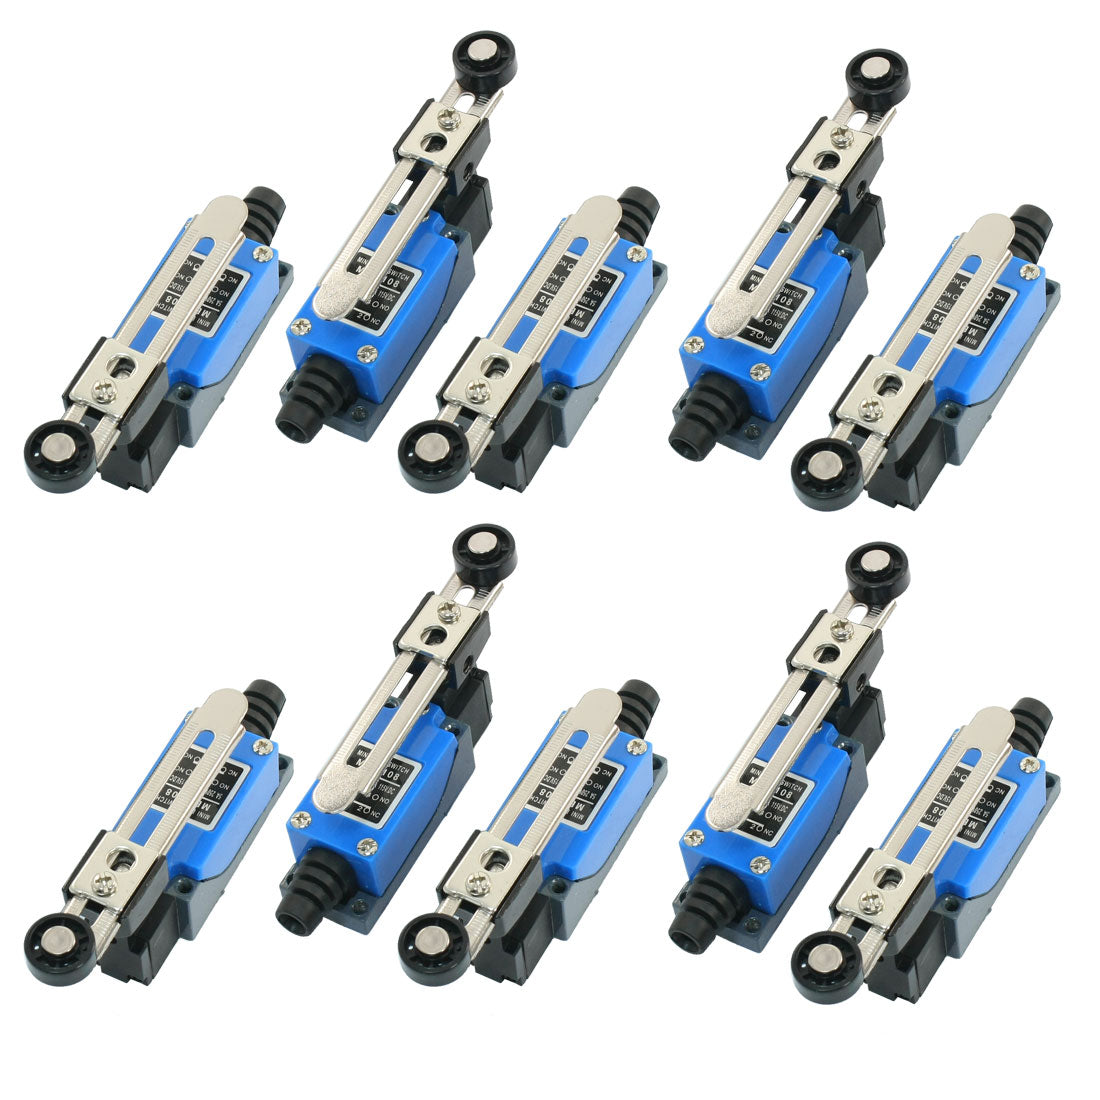 uxcell Uxcell 10 Pcs Adjustale Roller Lever Actuator Limit Switch ME-8108 for CNC Mill Plasma